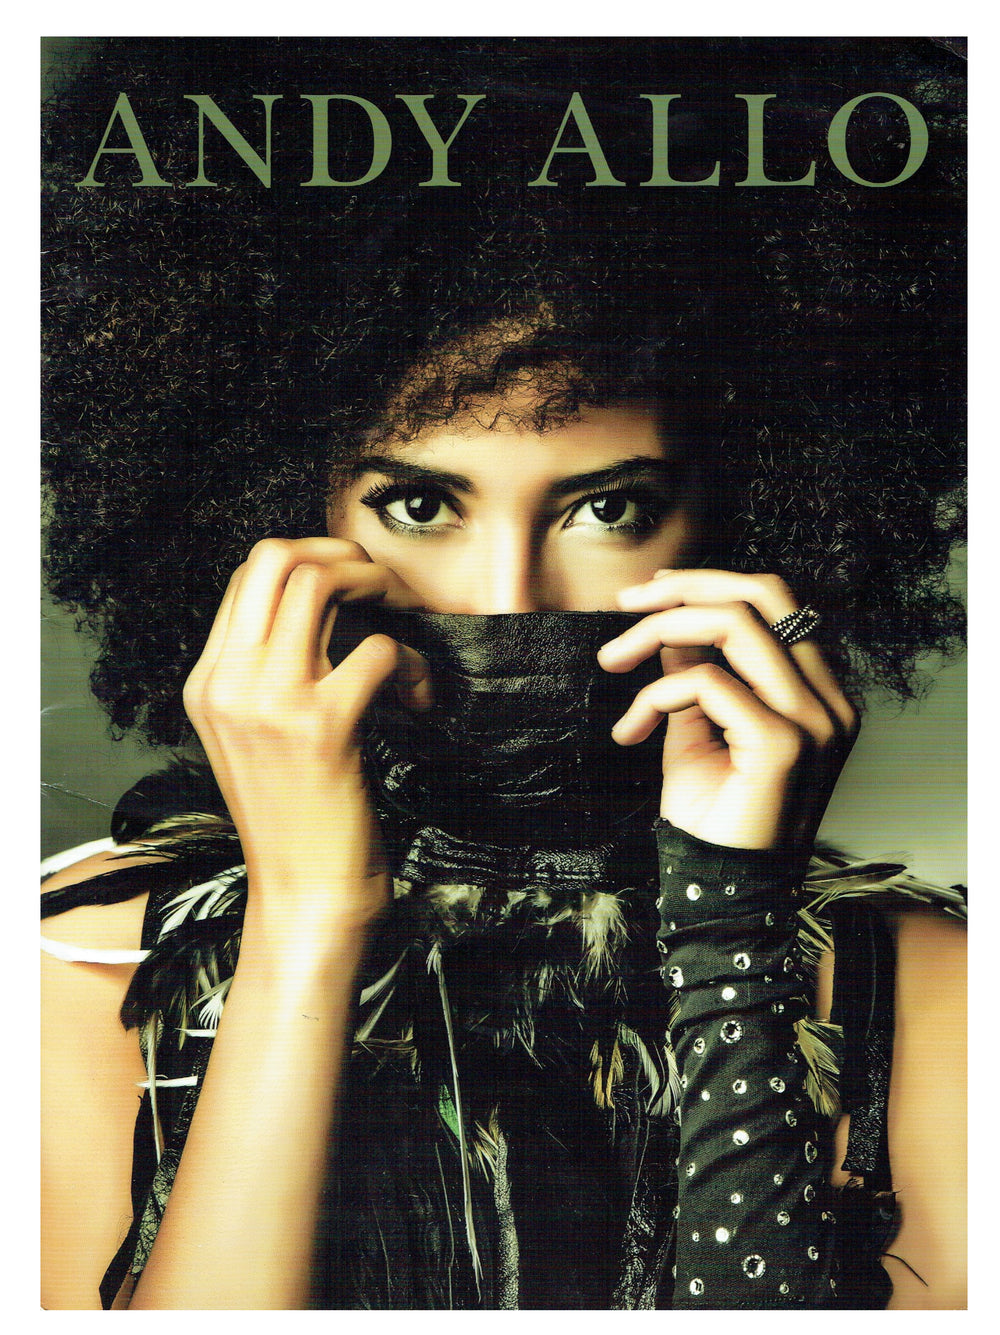 Prince – Andy Allo Stunning Official Tour Book Superconductor Prince Mike Scott John Blackwell